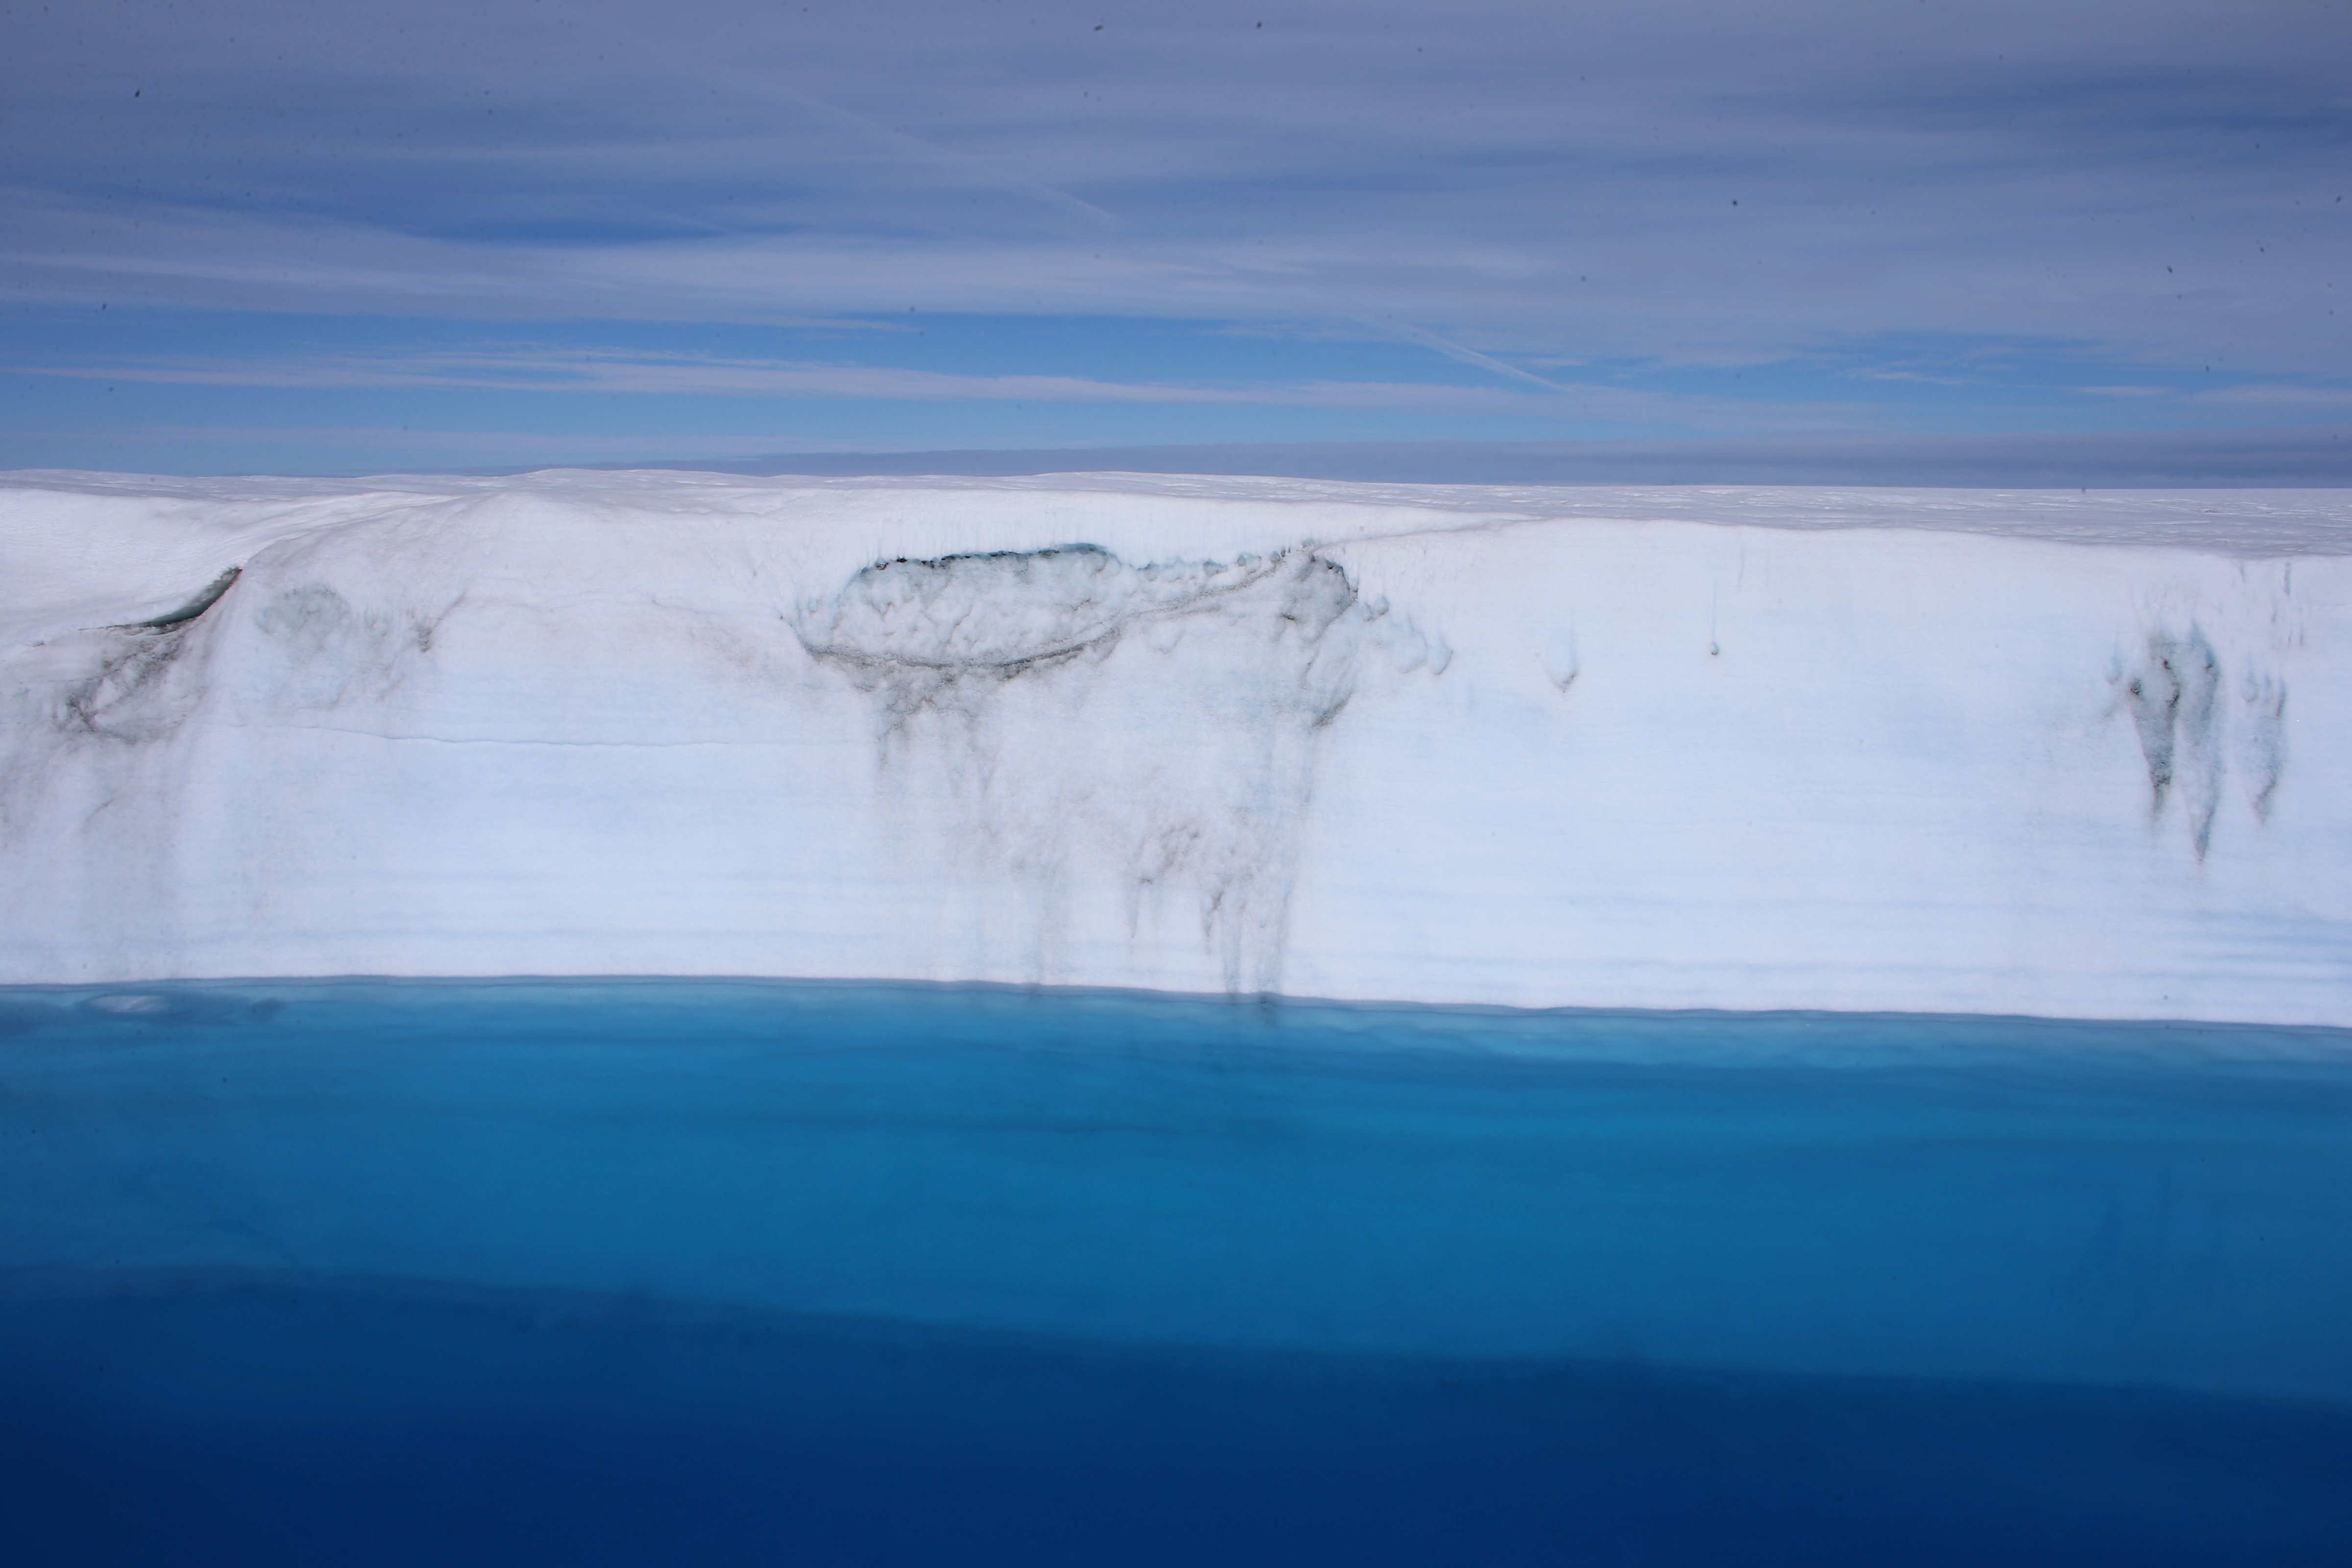 Part of the glacial ice sheet that covers about 80 percent of the country is seen on July 17, 2013 on the Glacial Ice Sheet, Greenland. (Joe Raedle&mdash;Getty Images)